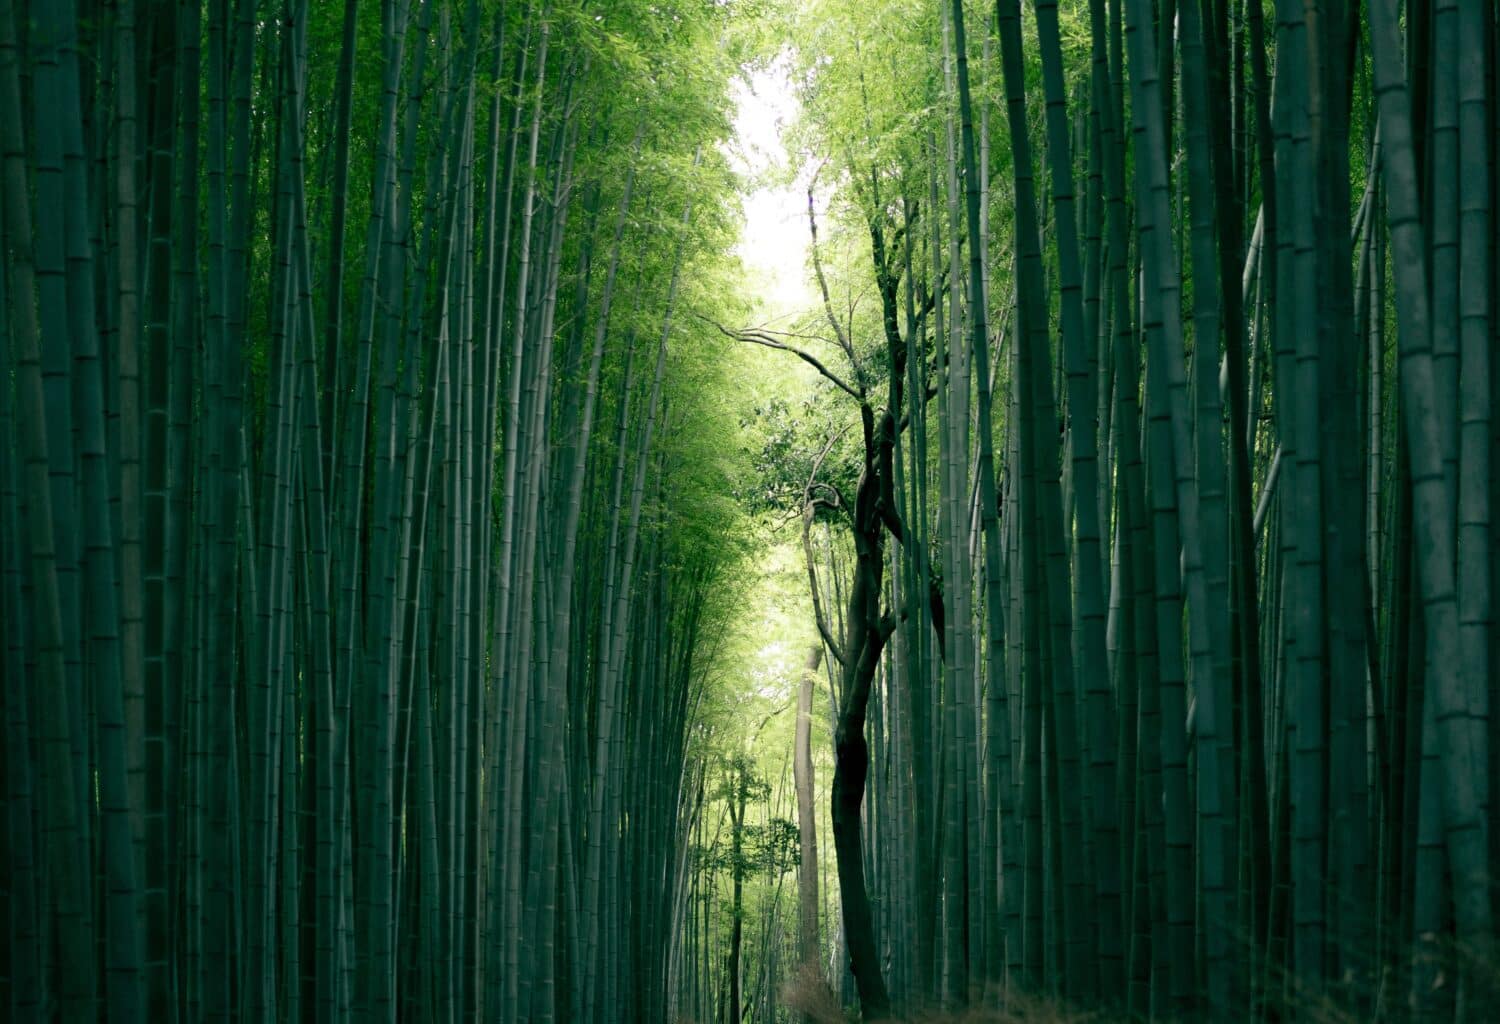 Global tech company based in Kyoto, Japan, known for its stunning bamboo forest.